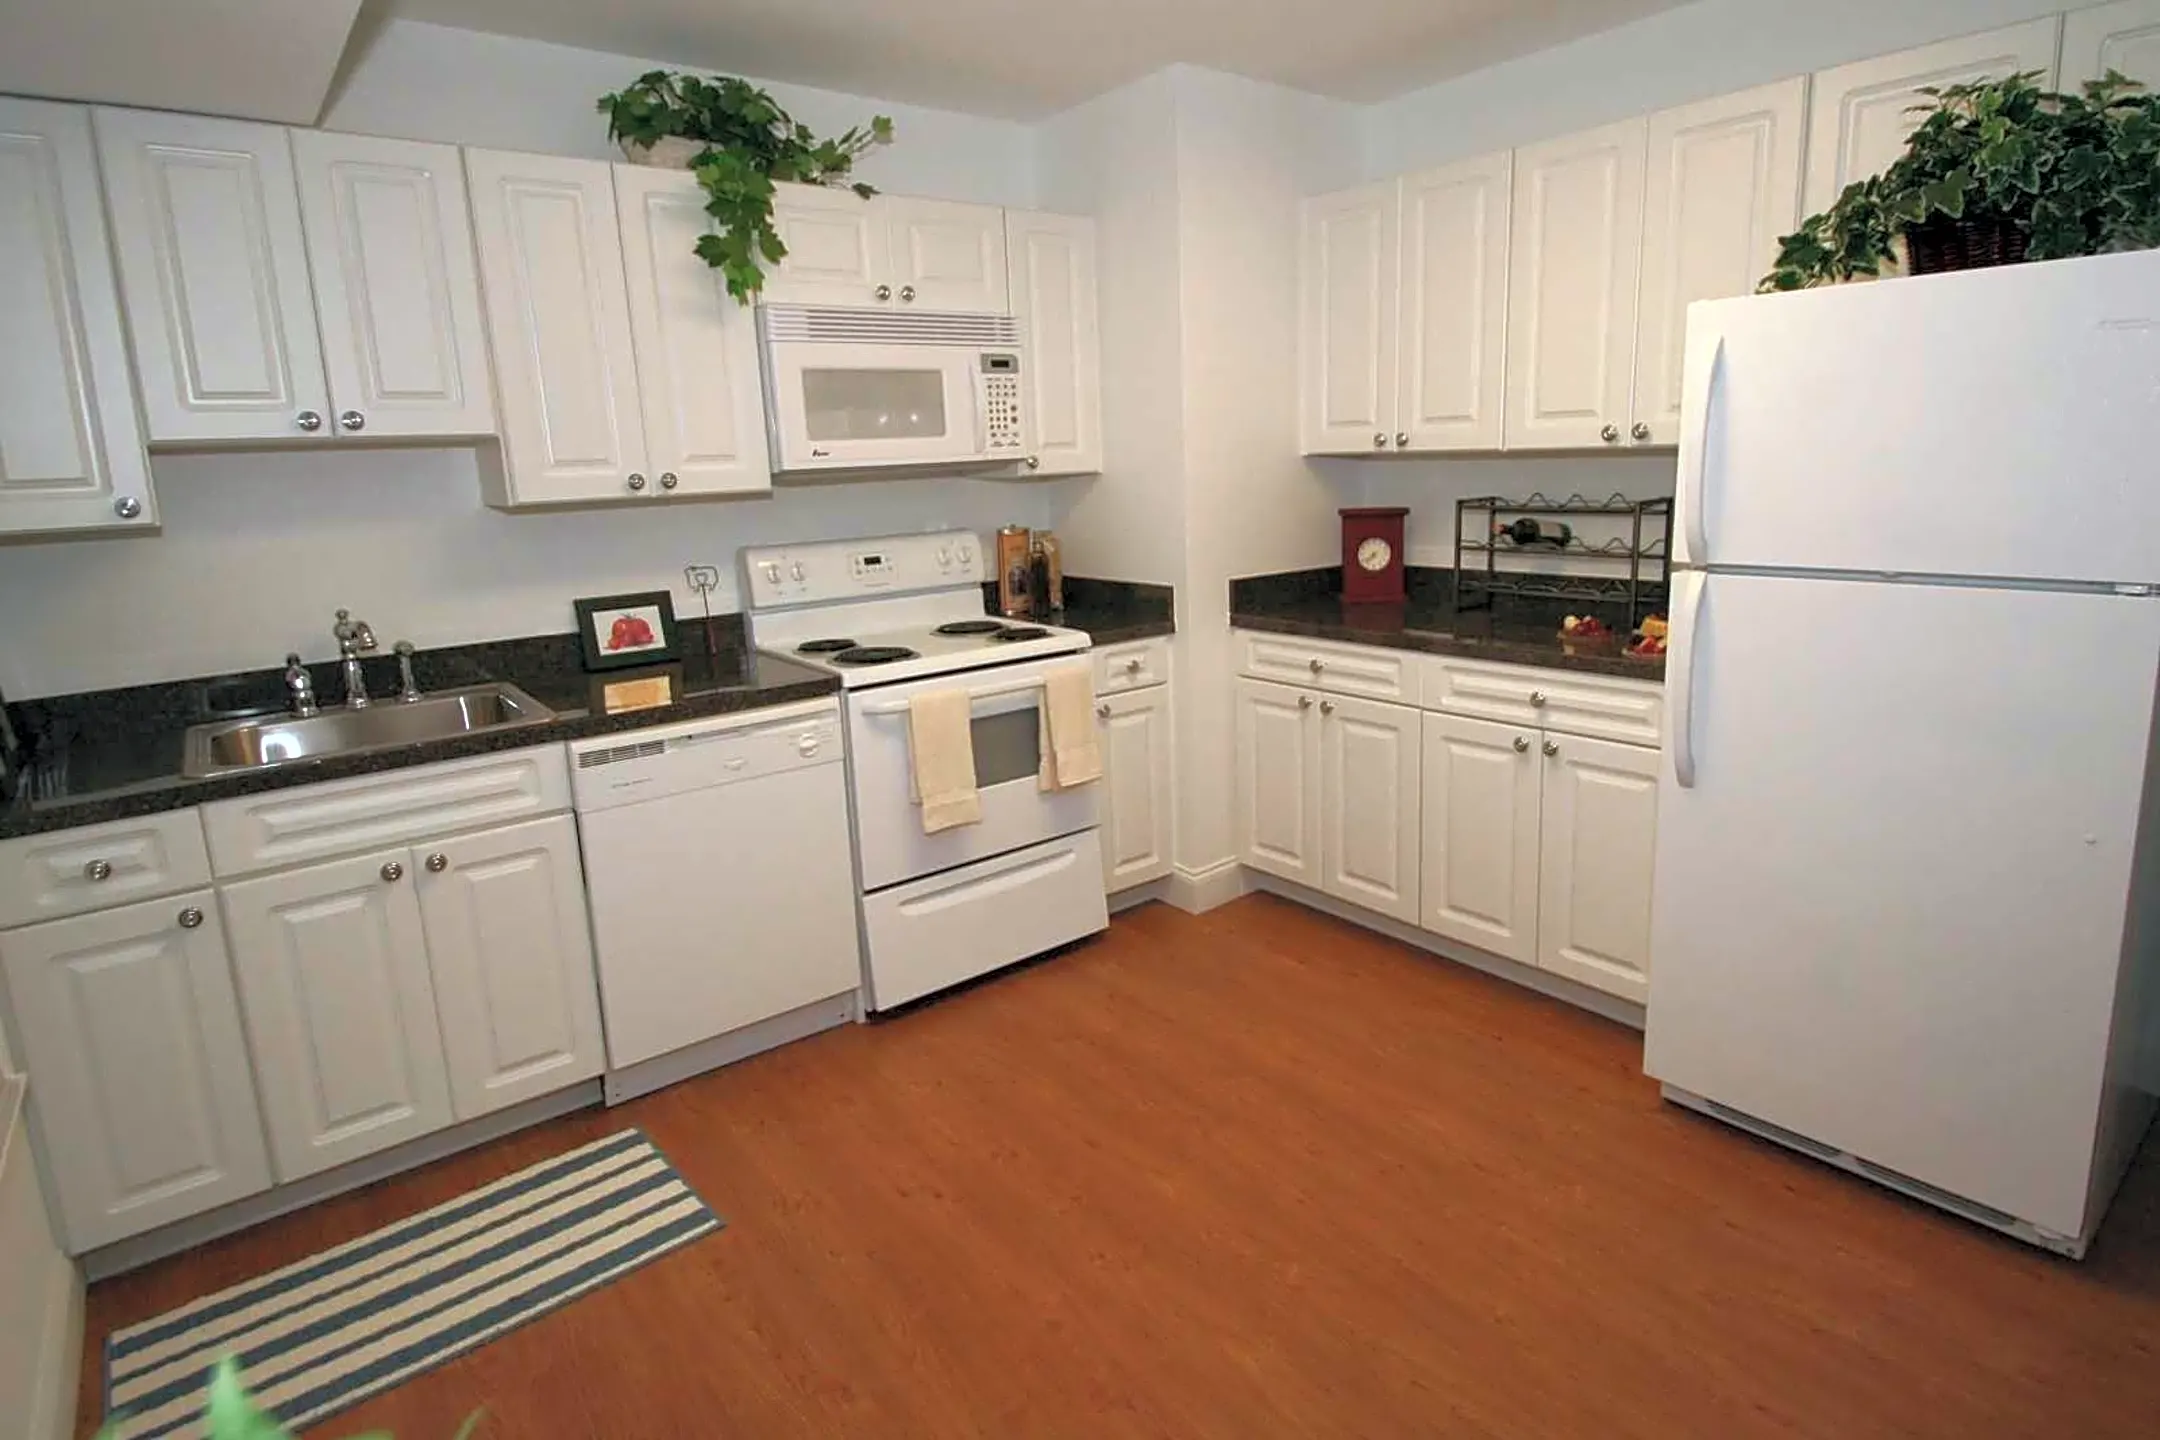 Kitchen - The Fairways Apartments & Townhomes - Thorndale, PA